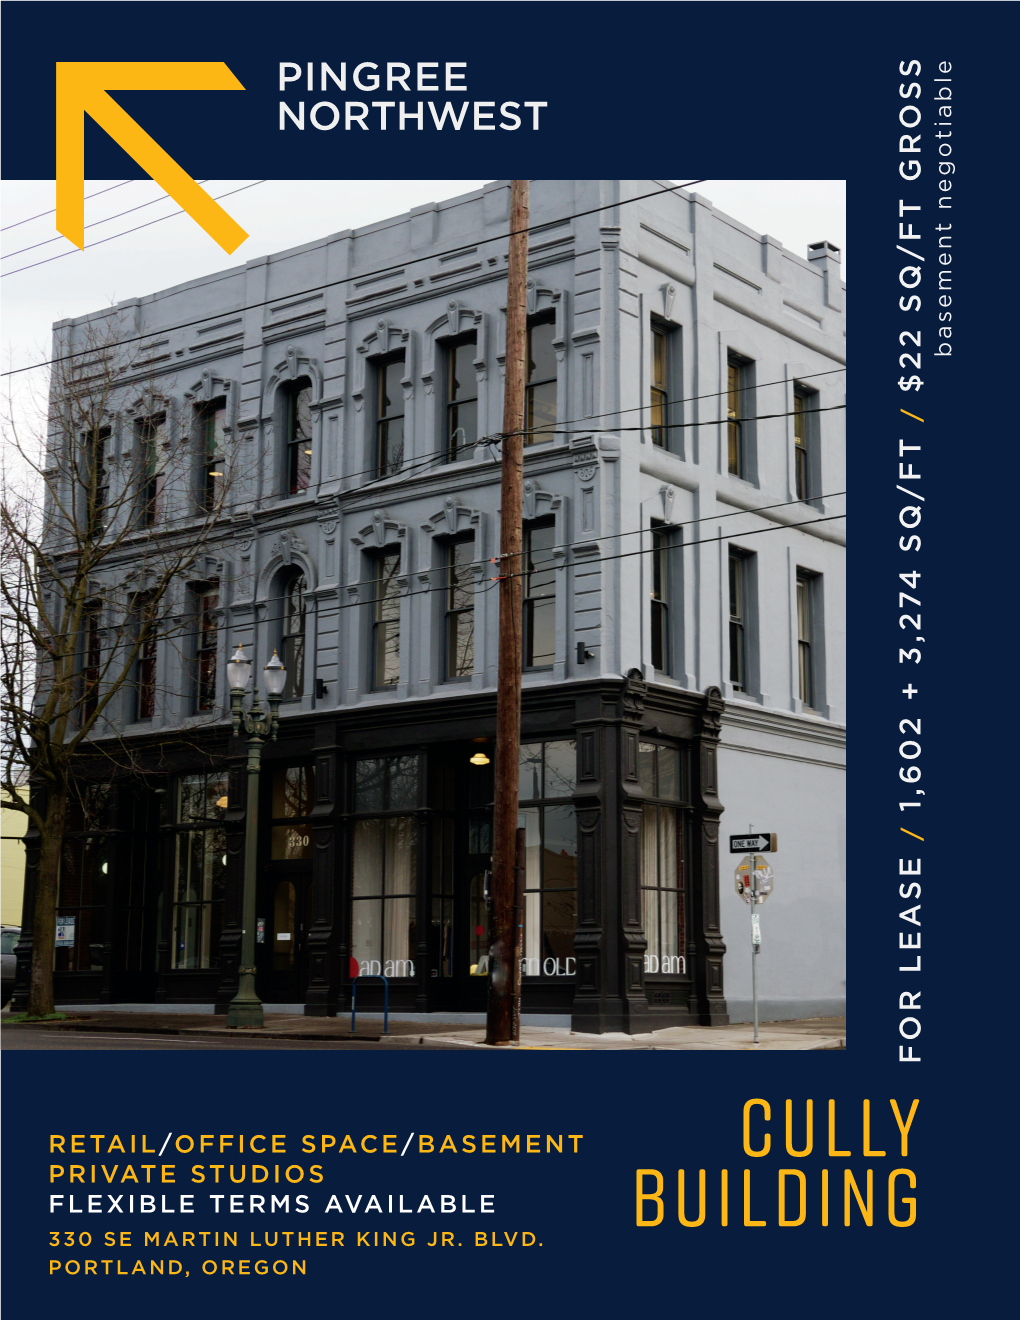 Cully Building Retail / Office / Basement Private Studios 330 Se Martin Luther King Jr